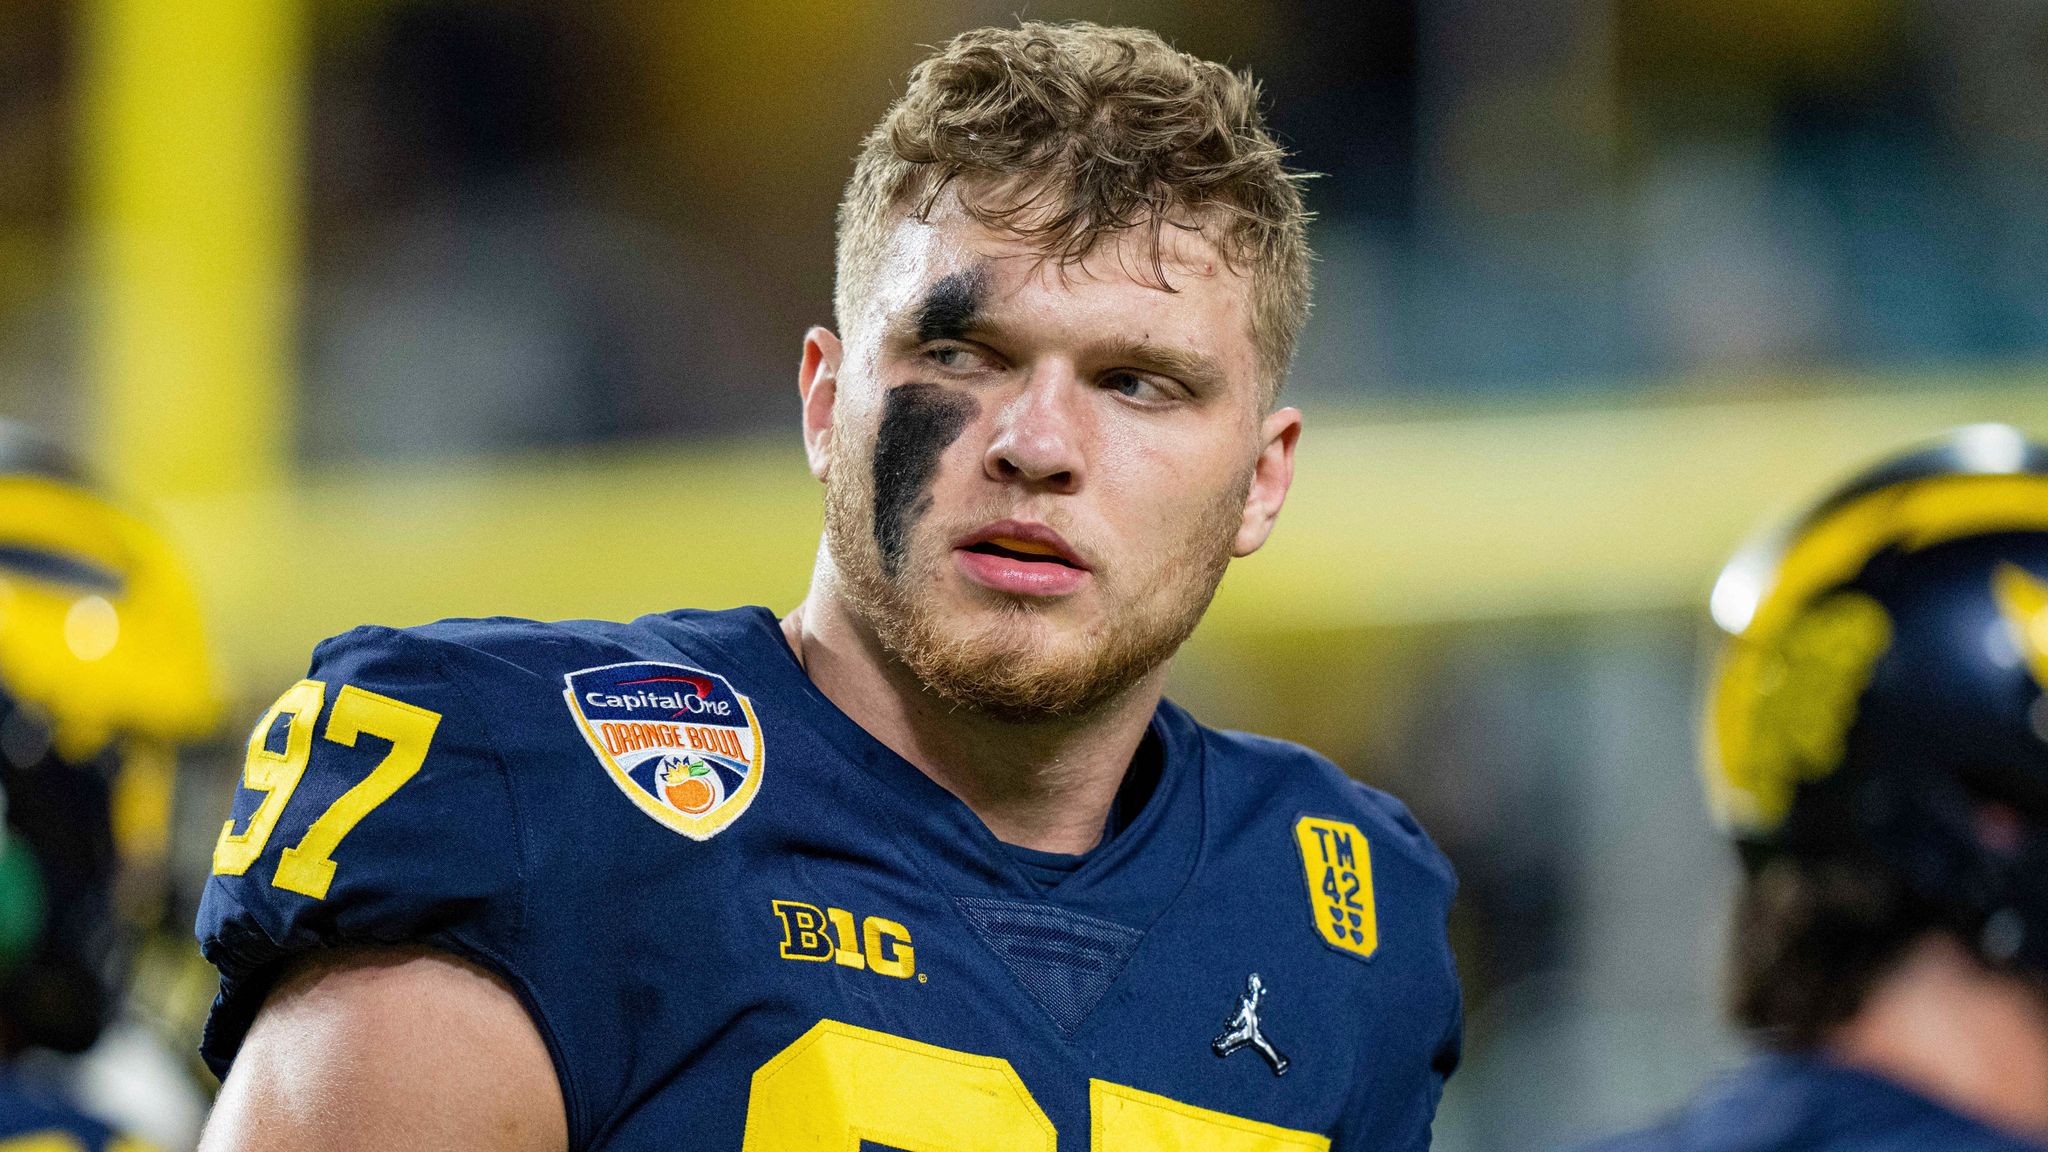 Jim Harbaugh feels this Michigan Wolverines star deserves to be the first  overall pick in 2022 NFL Draft